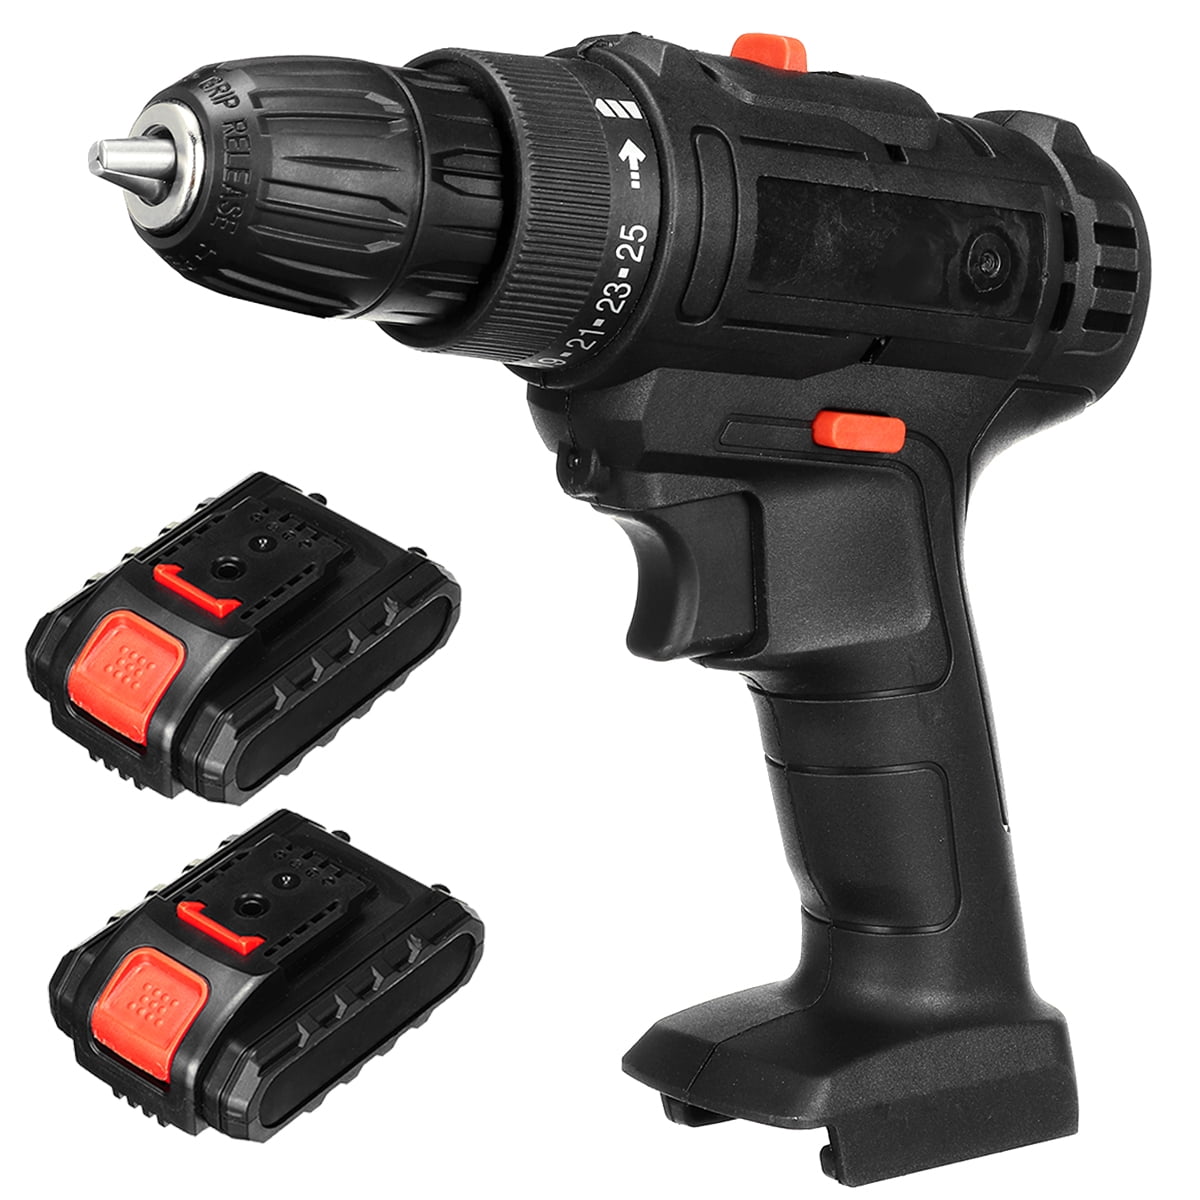 Electric Drill Driver Handheld Light Weight Variable Speed Durable Chuck Bit 